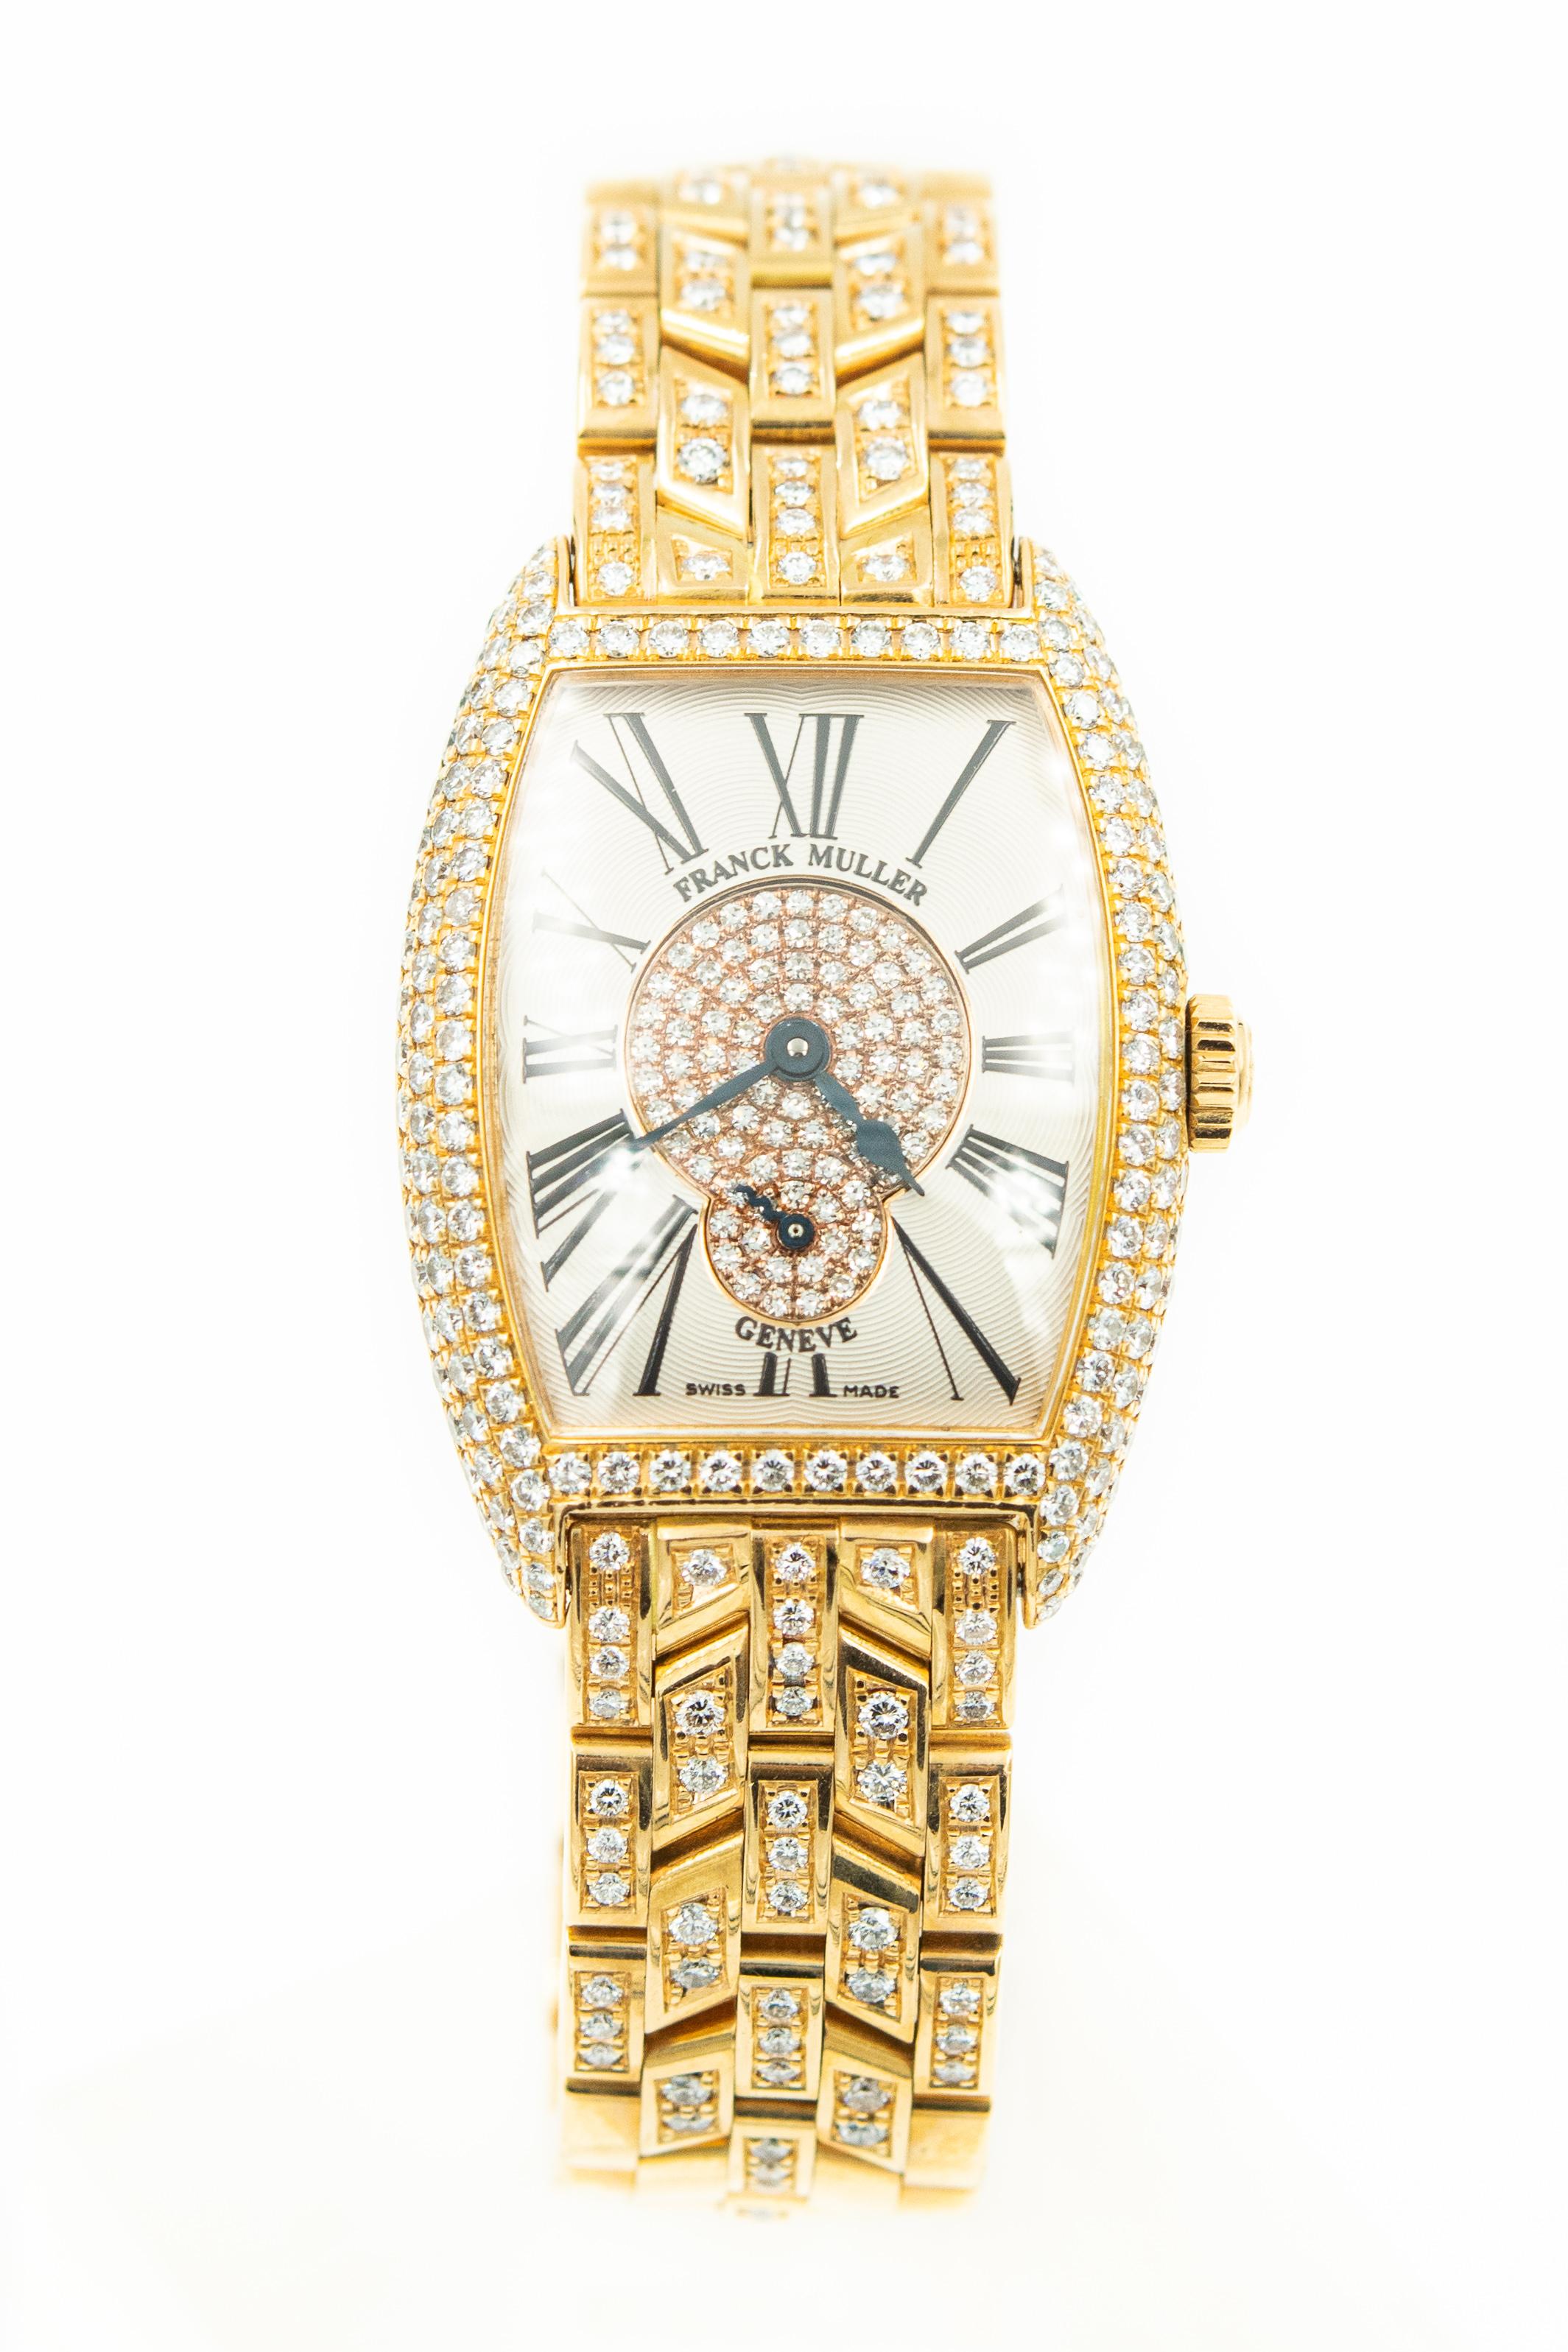 Franck Muller ladies Cintree Curvex manual wristwatch Ref. 1751 SG D CD consisting of 18k rose gold case and bracelet with diamonds on the dial, bezel and at the front section of the band.  The case is set with 157 brilliant-cut diamonds.  The